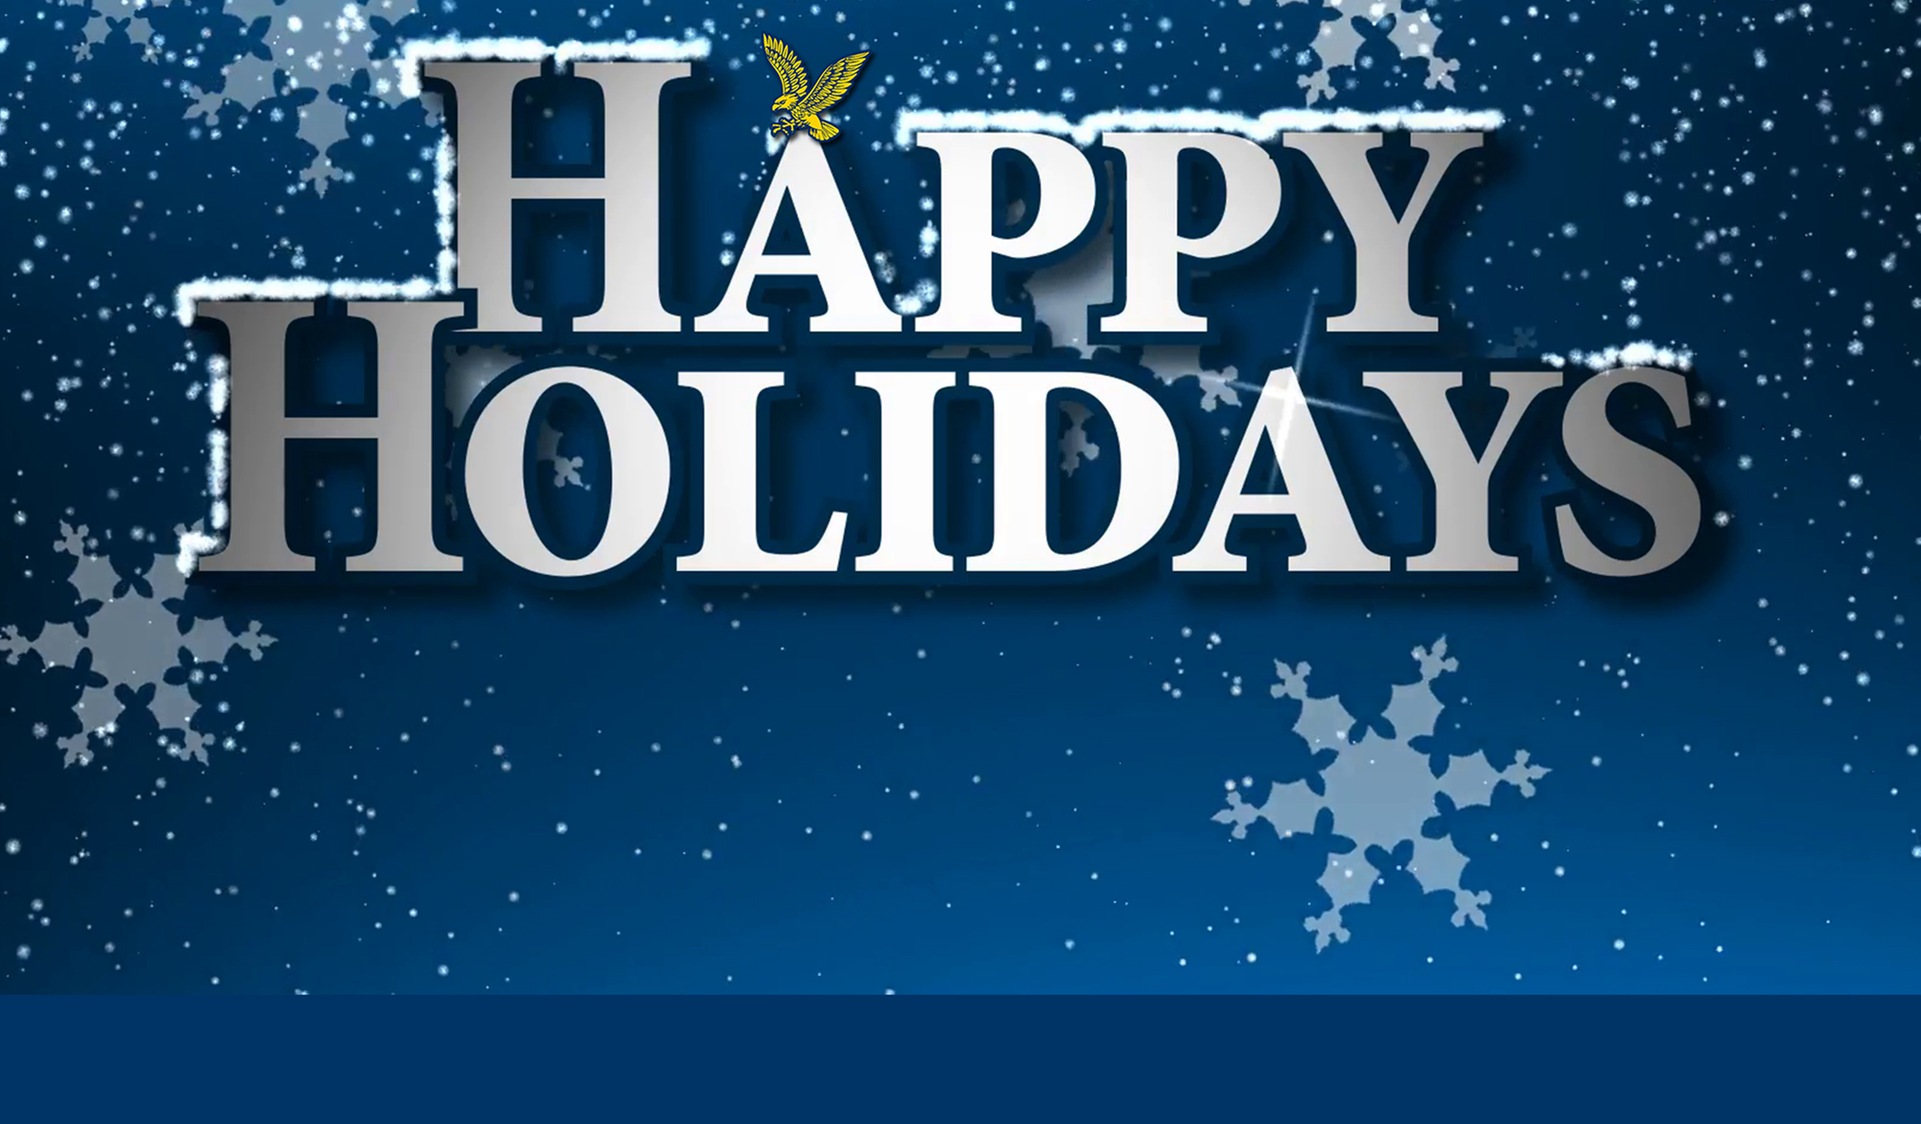 WISHING YOU THE BEST FOR A SAFE & HAPPY THE HOLIDAY SEASON